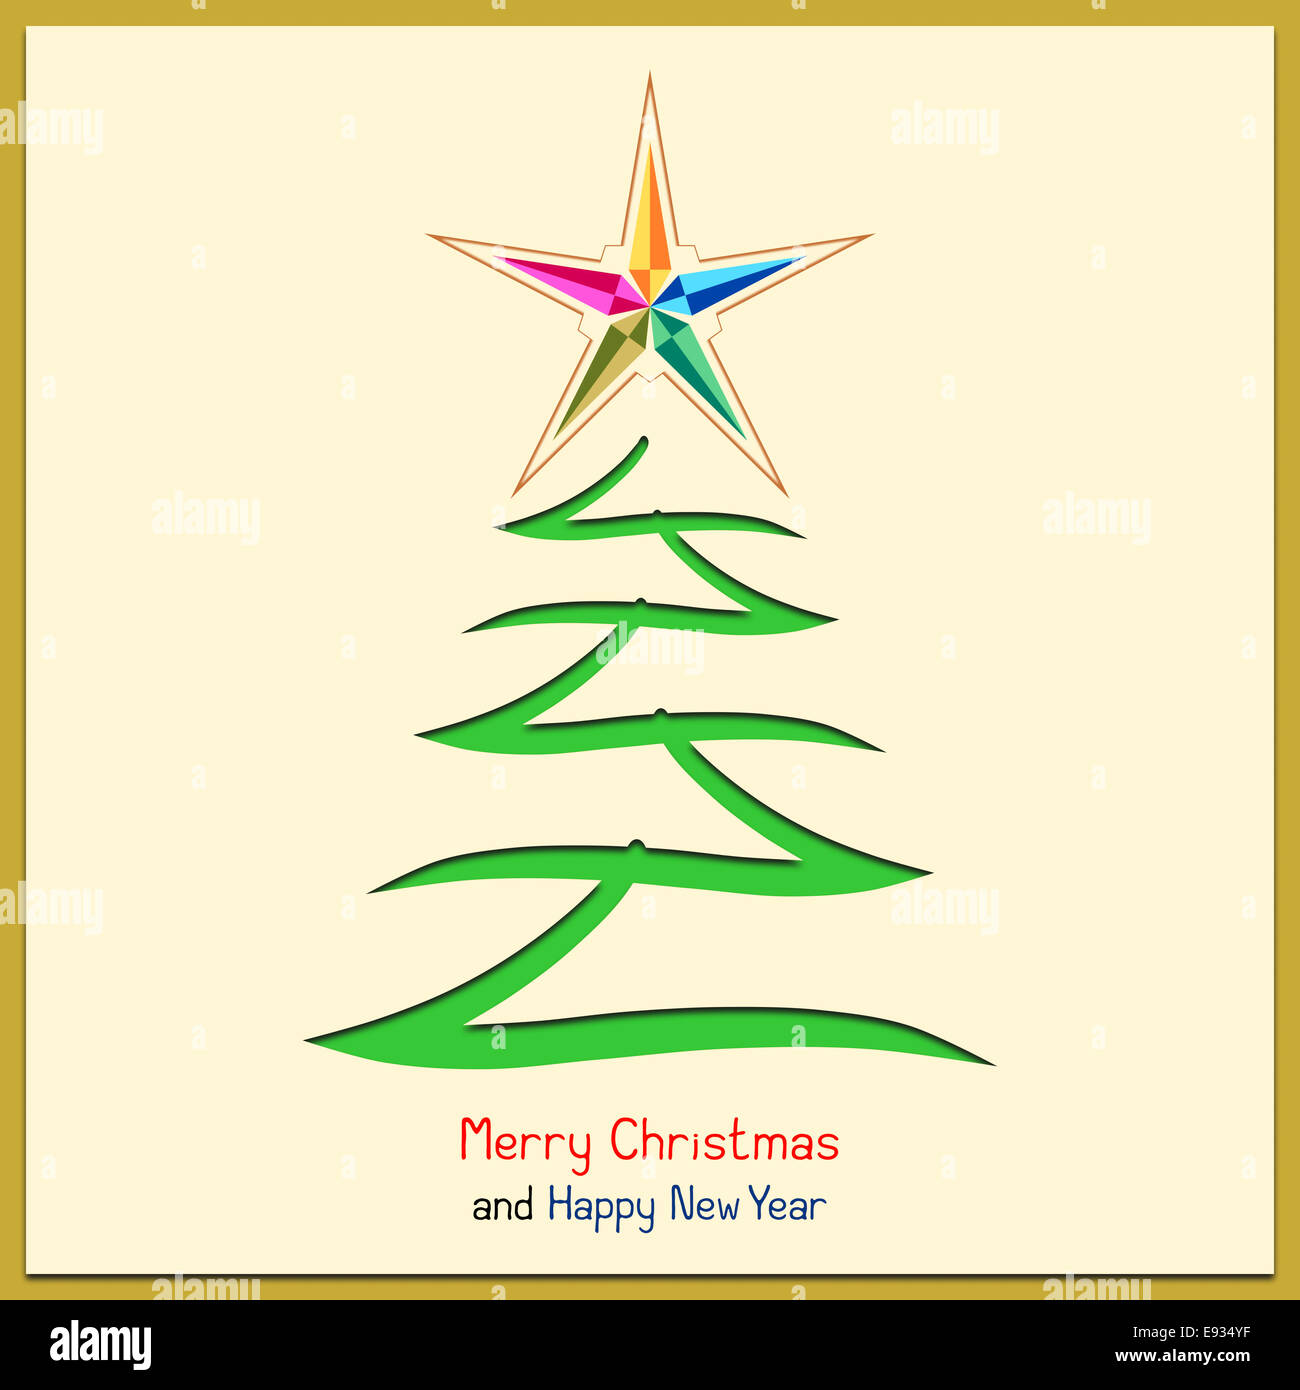 An illustration of Christmas and New Year message with brush stroke tree and colorful star. Custom handwritten message. Stock Photo